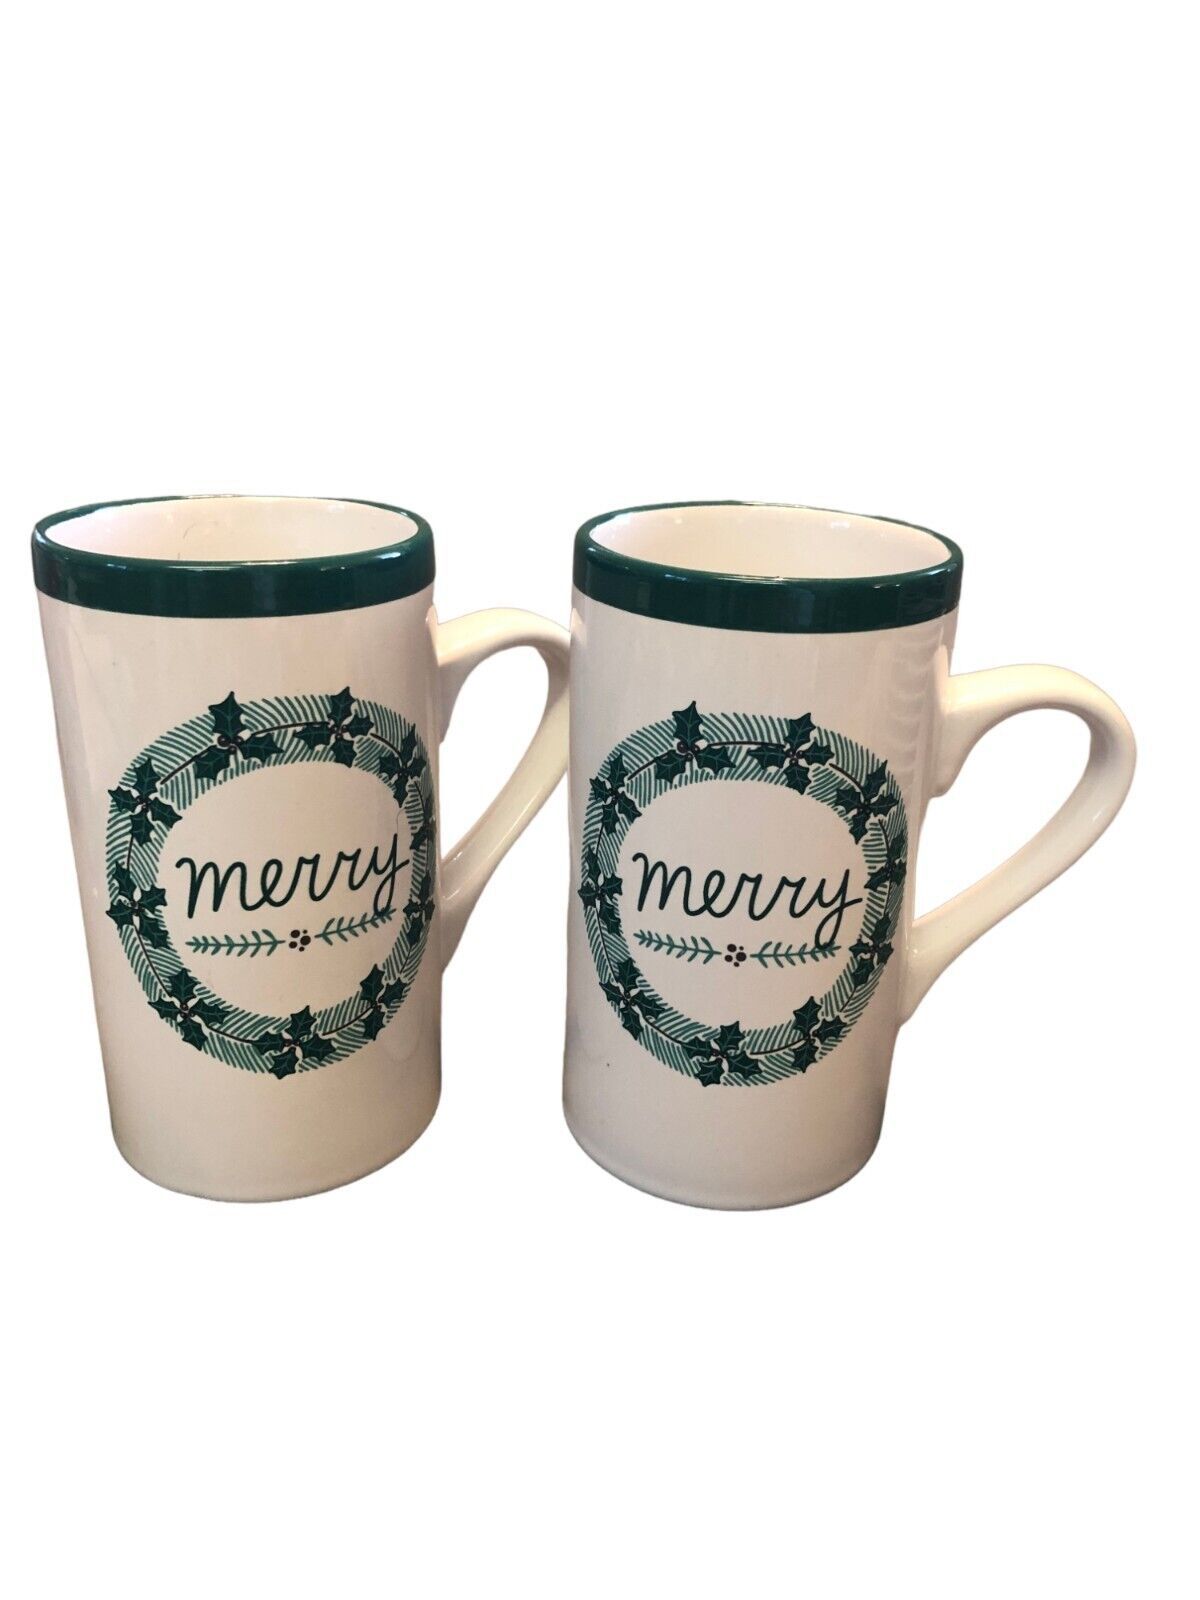 Primary image for Vtg MERRY Wreath Mugs Holly Dark Green Wht DesignPac Gifts Pair FREE SHIP